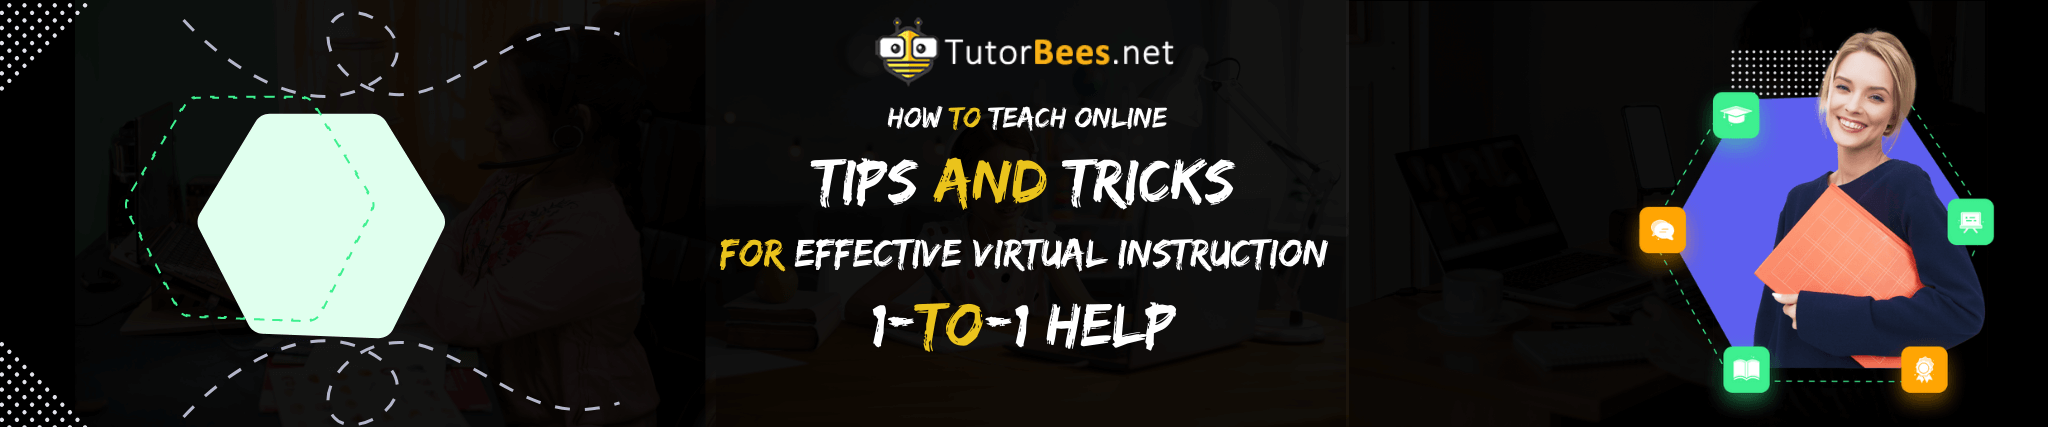 How to Teach Online: Tips and Tricks for Effective Virtual Instruction, 1-to-1 help